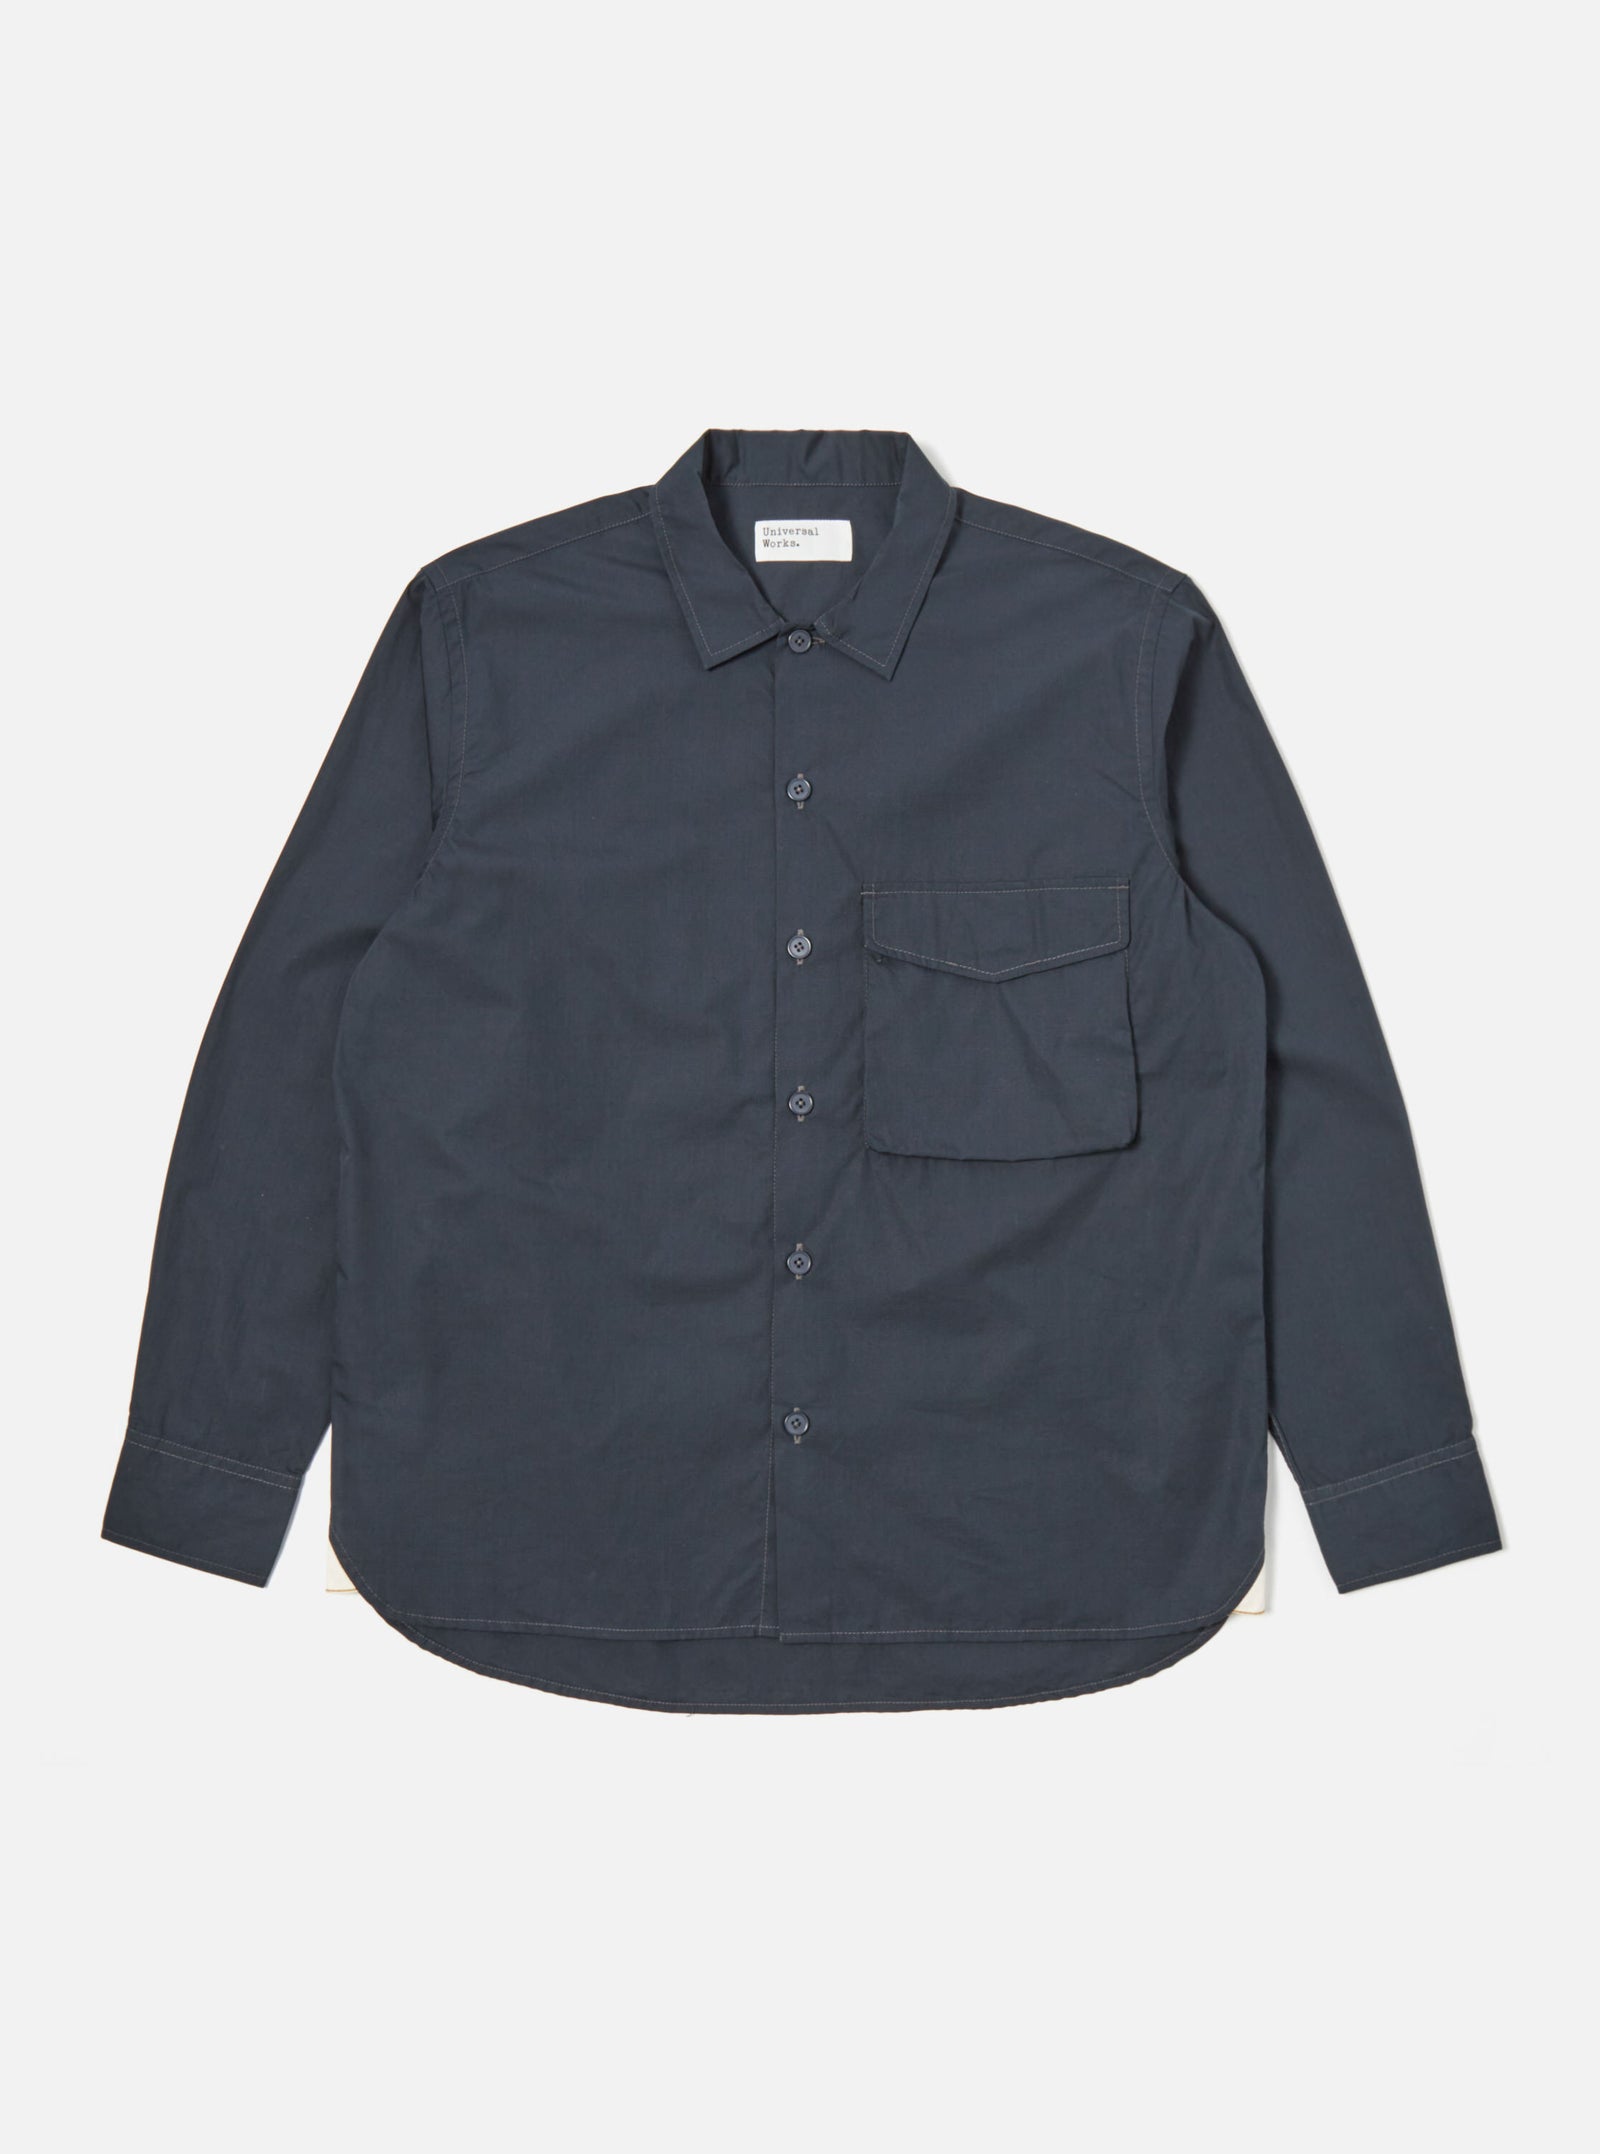 Universal Works Field Shirt in Navy Broad Cloth